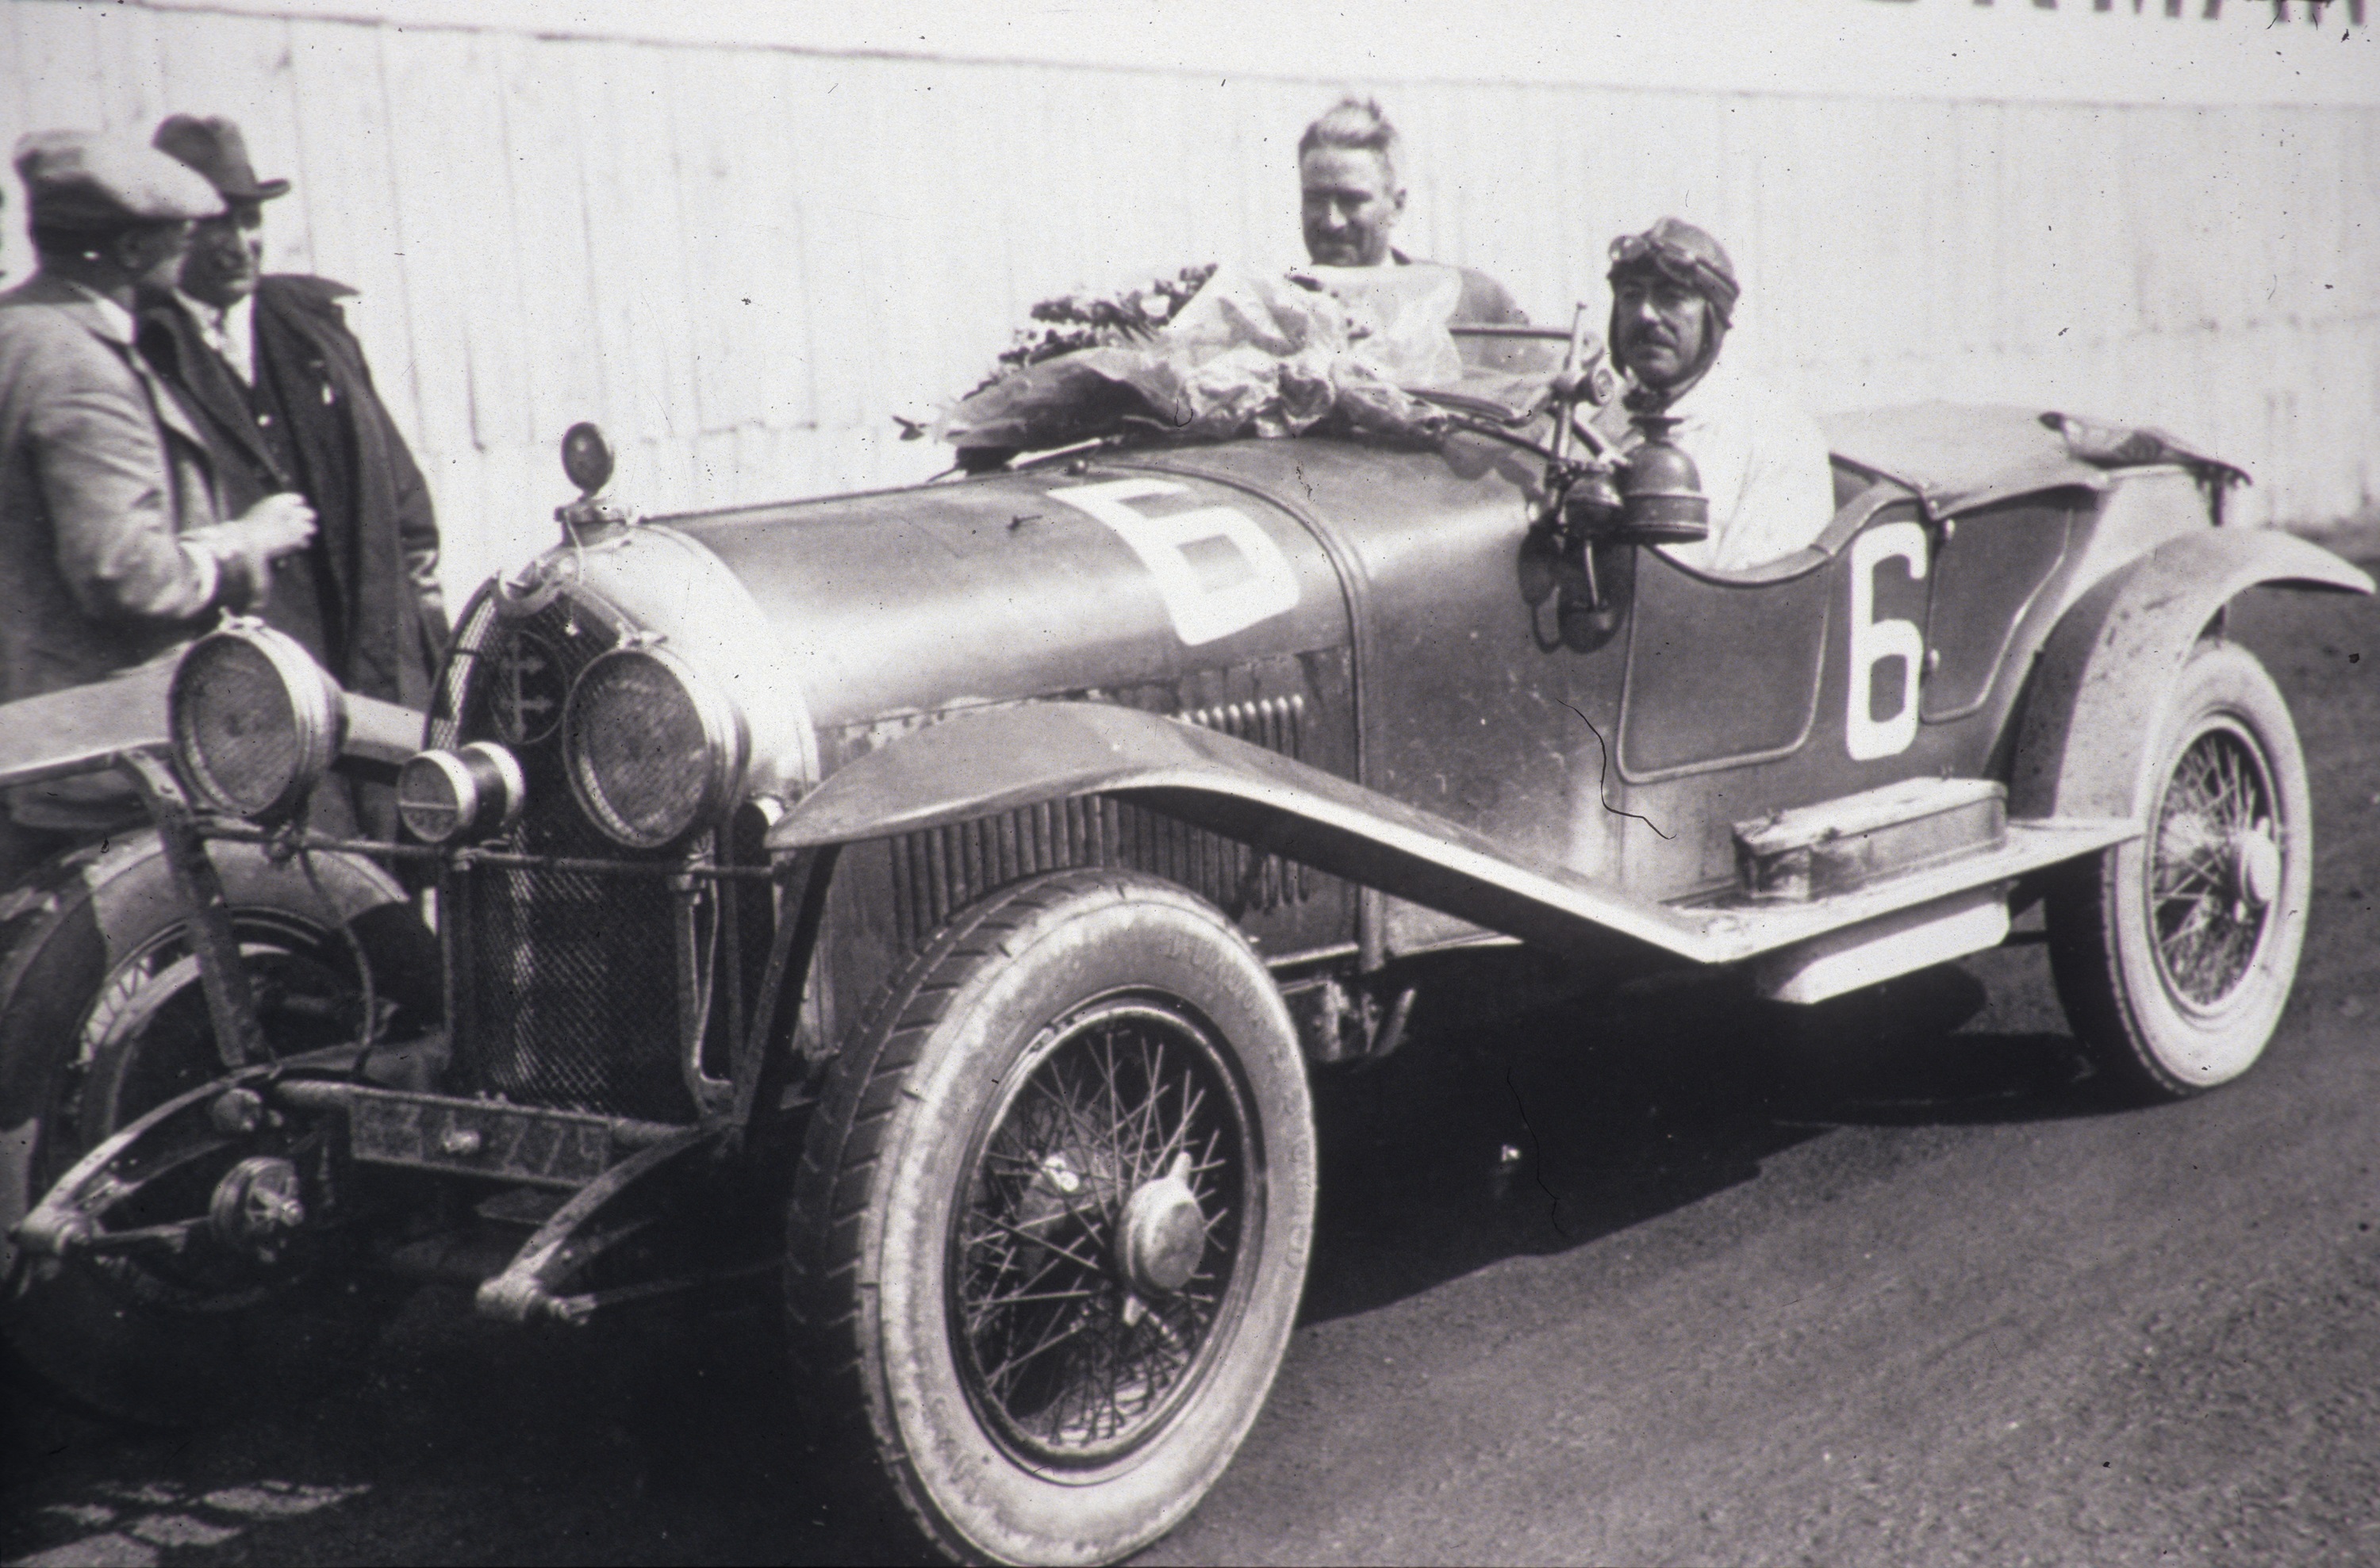 The Lorraine-Dietrich B3-6, winner in 1925 and 1926, successfully set the distance record. During the second victory, Robert Bloch and André Rossignol covered 2,537 km.